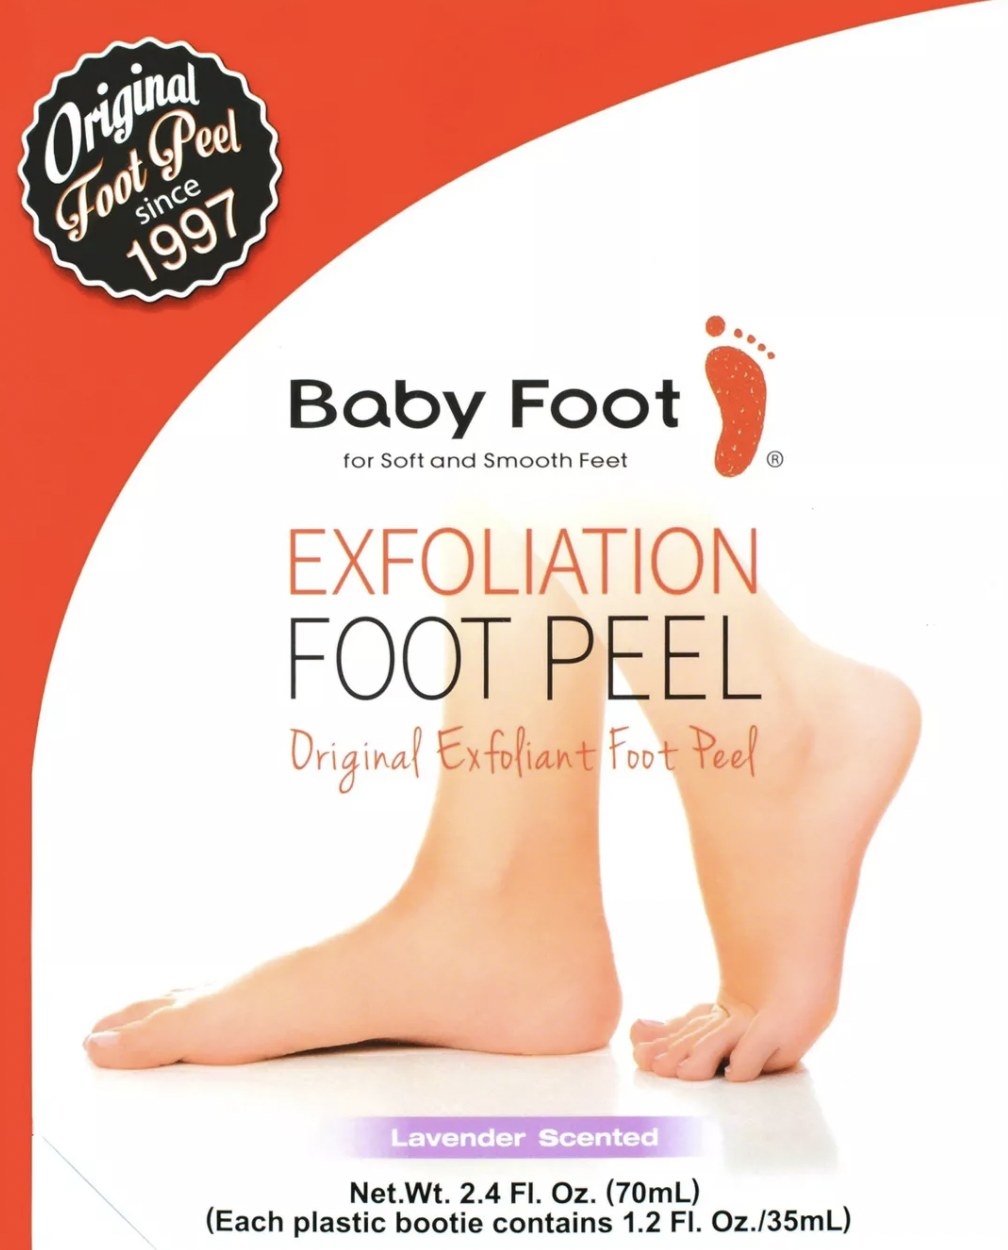 the packaging of the foot peel mask